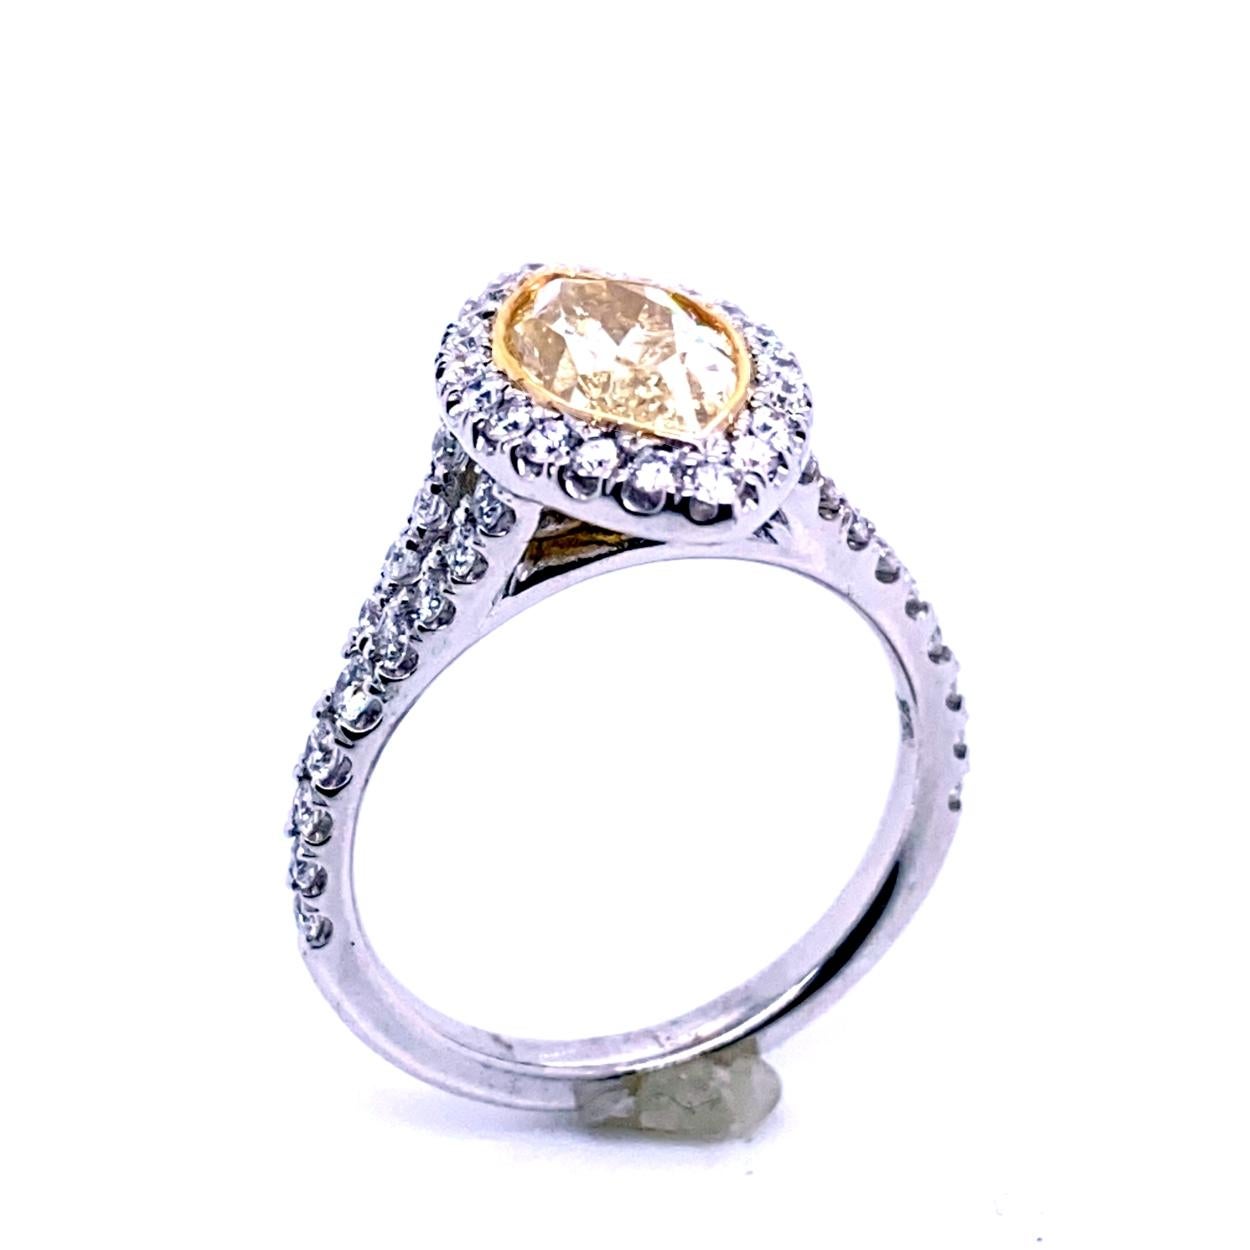 Contemporary 1.5 Carat Yellow MQ Diamond in Pave Set 18 Karat Split Shank Ring with Halo For Sale